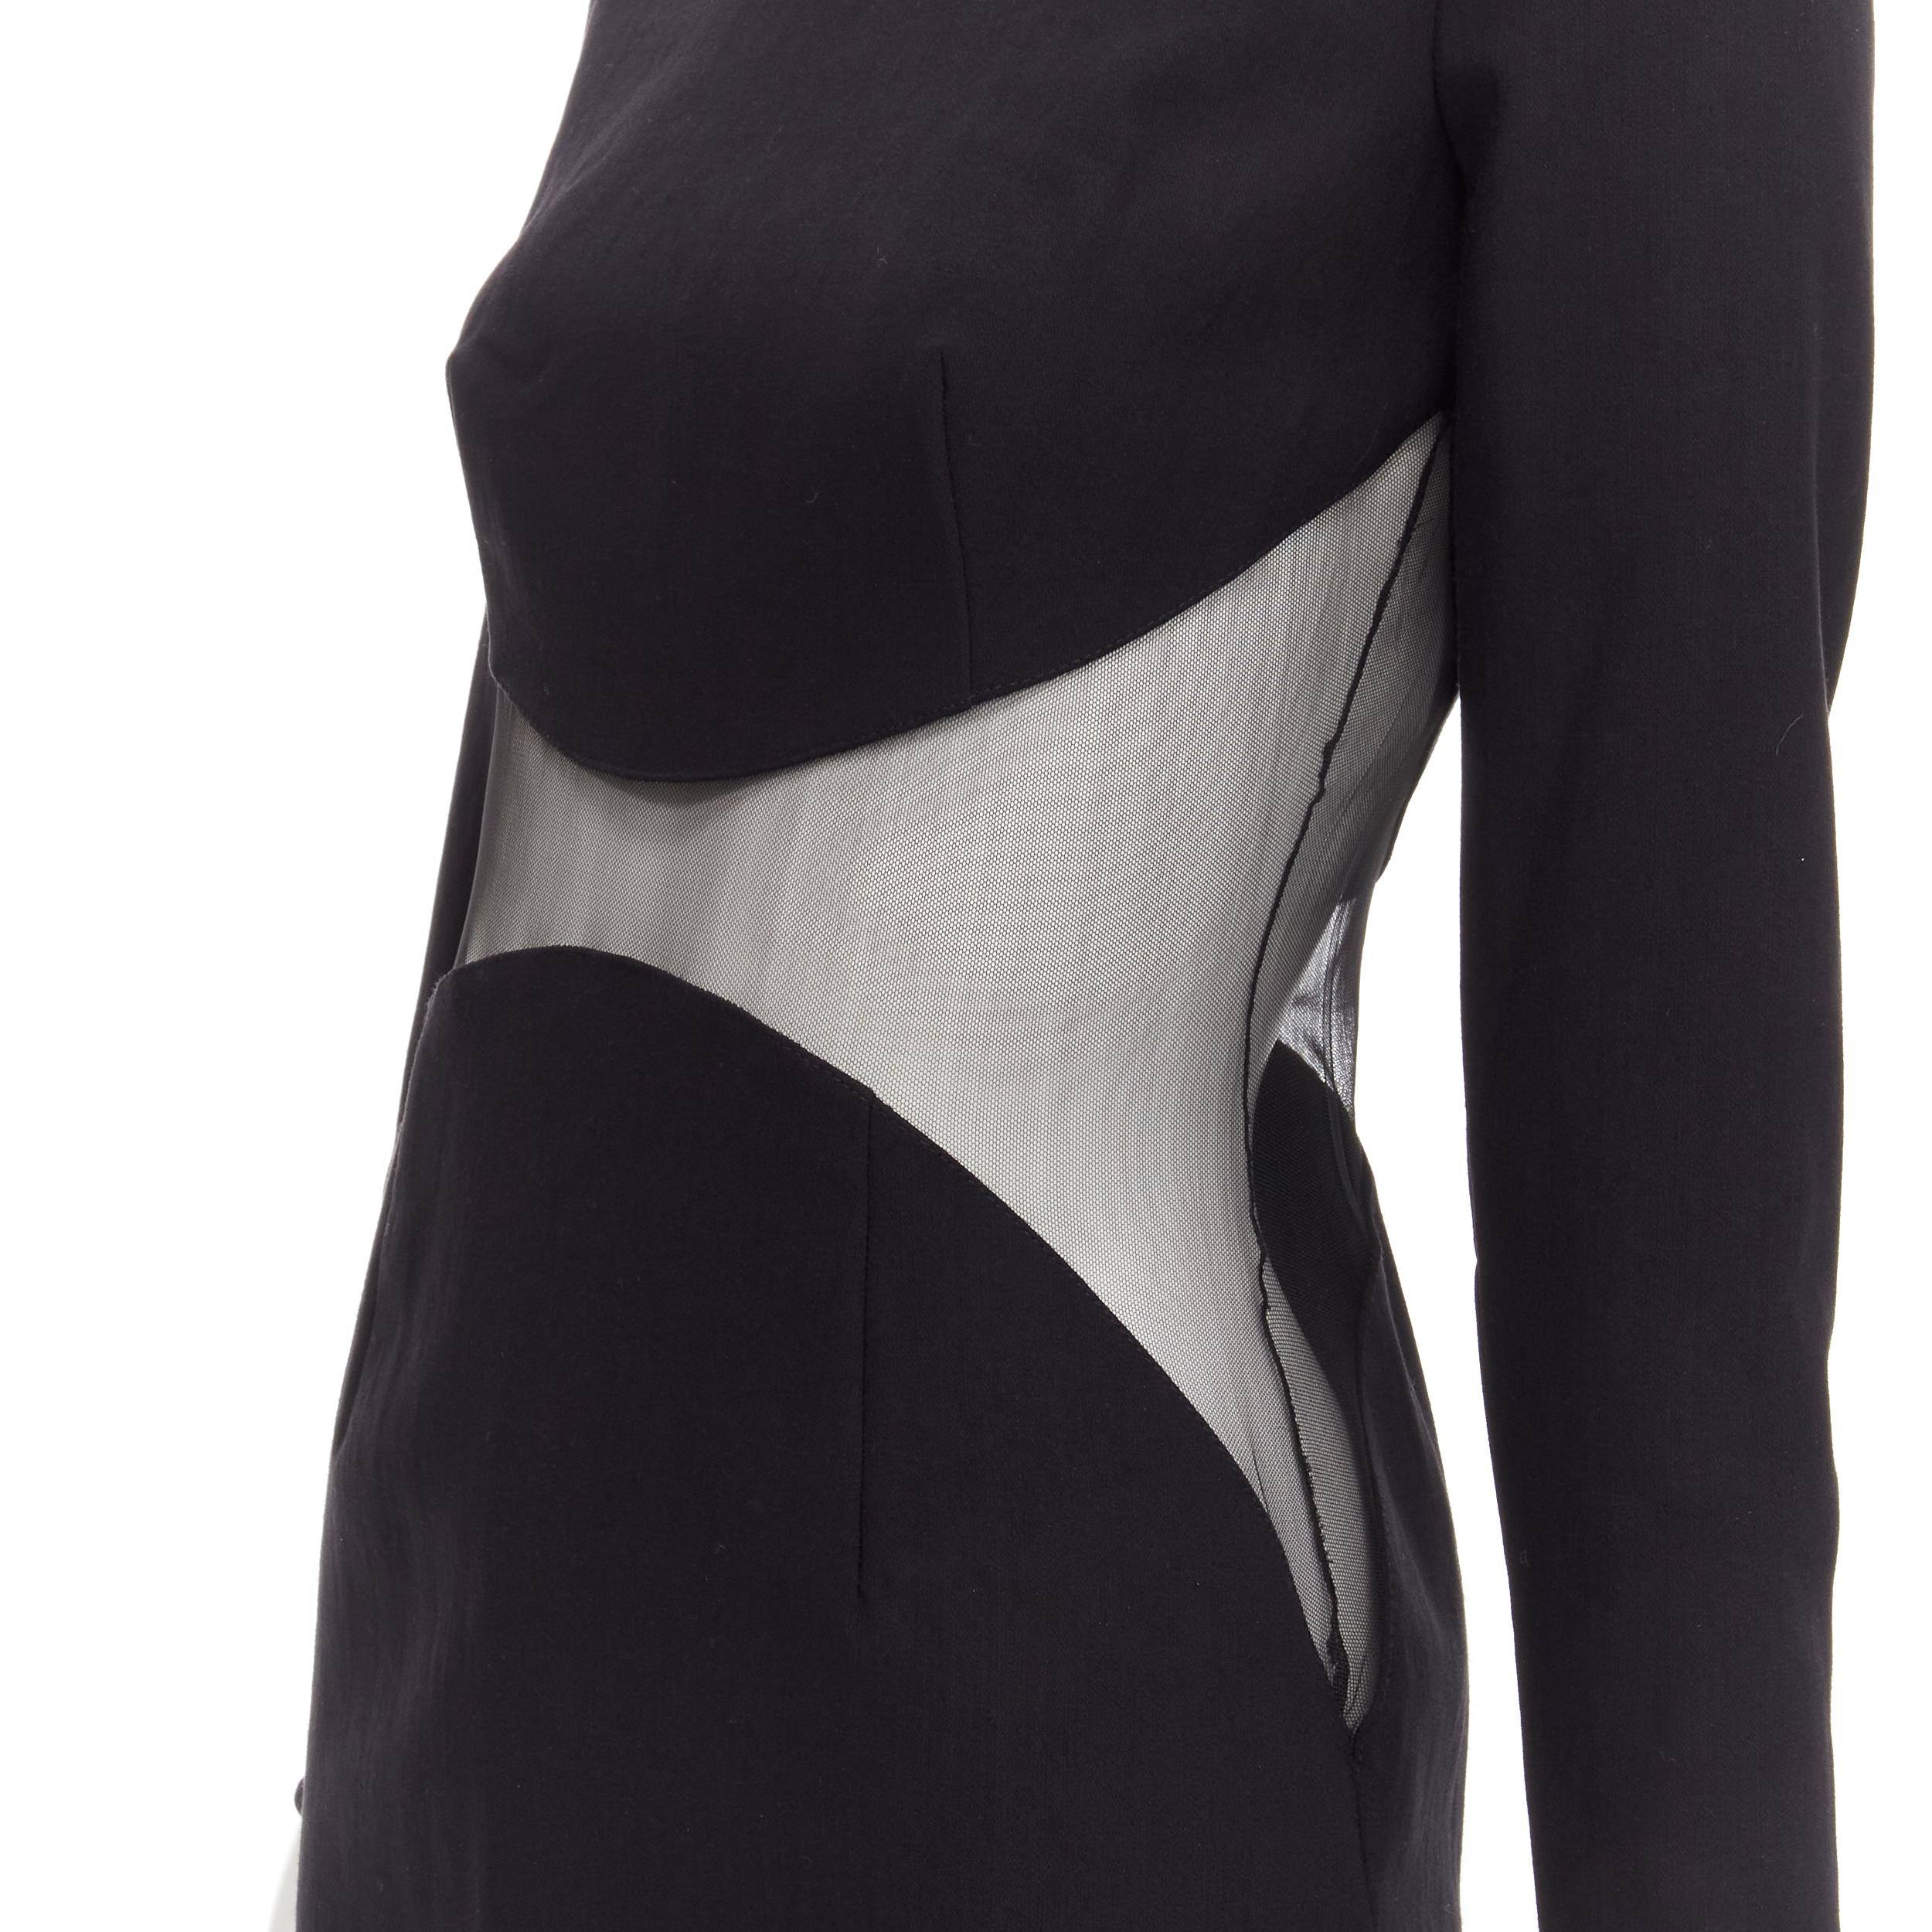 STELLA MCCARTNEY 2013 Runway Iconic sheer waist illusion bodycon dress IT40 S 
Reference: KEDG/A00053 
Brand: Stella McCartney 
Collection: 2013 
Material: Wool 
Color: Black 
Pattern: Solid 
Closure: Zip 
Extra Detail: Curved illusion dress with